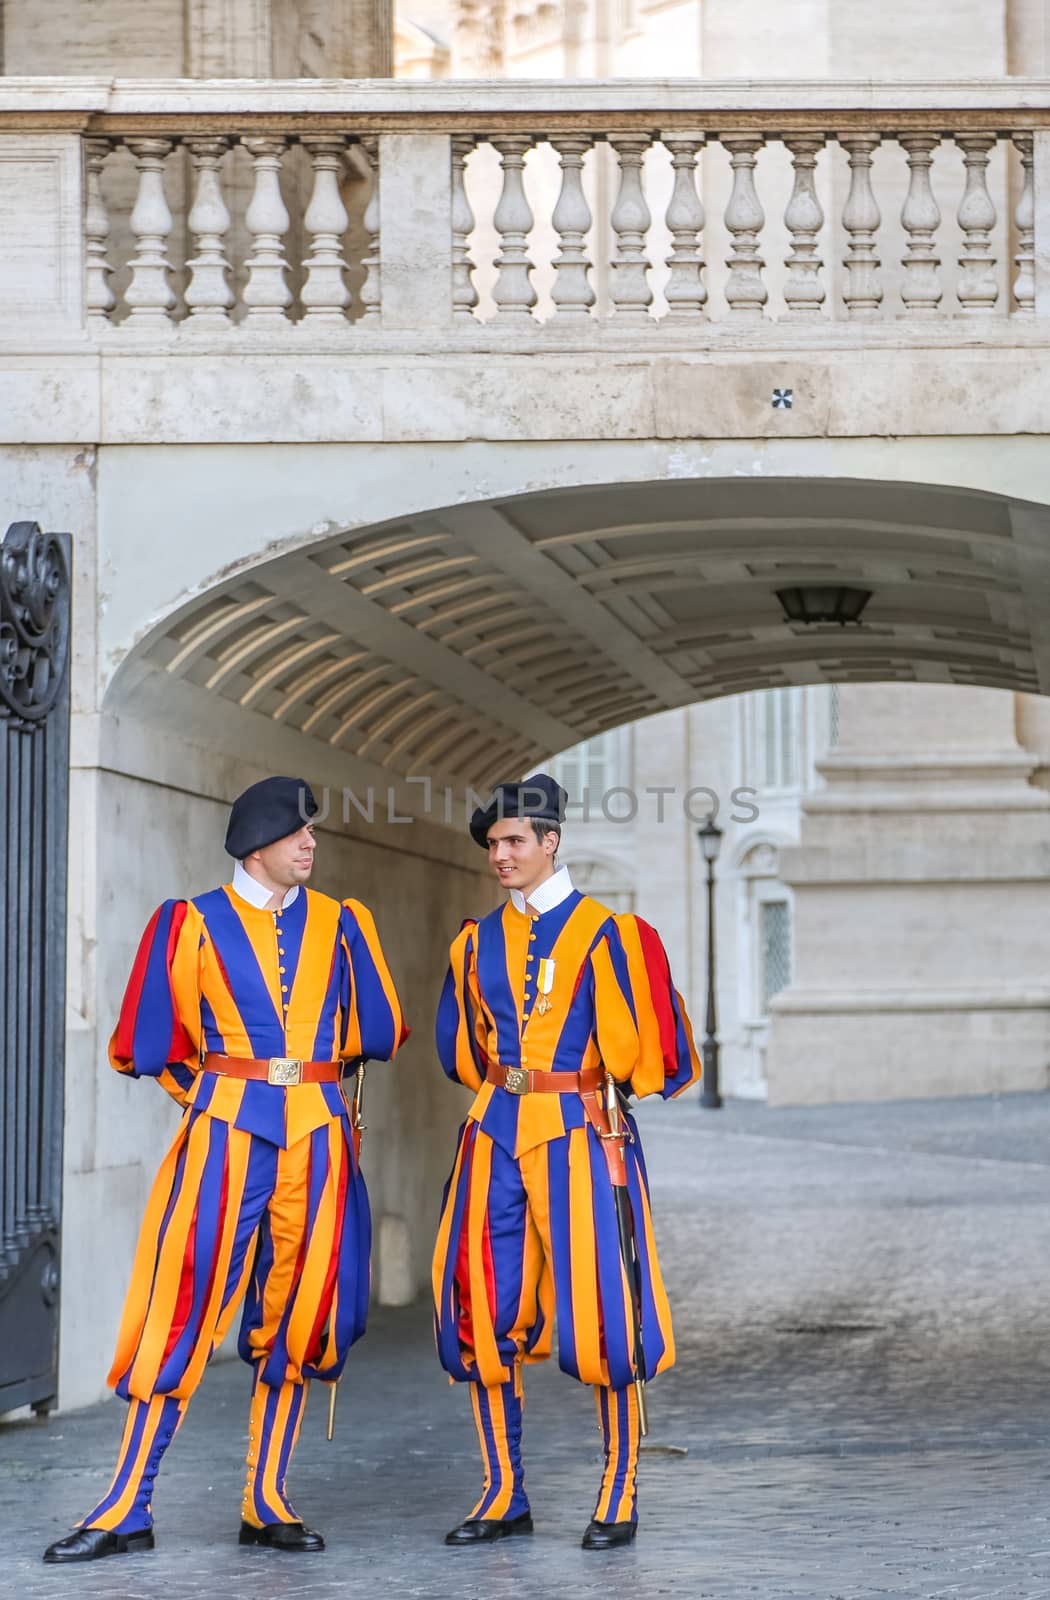 Members of the Pontifical Swiss Guard by Sid10